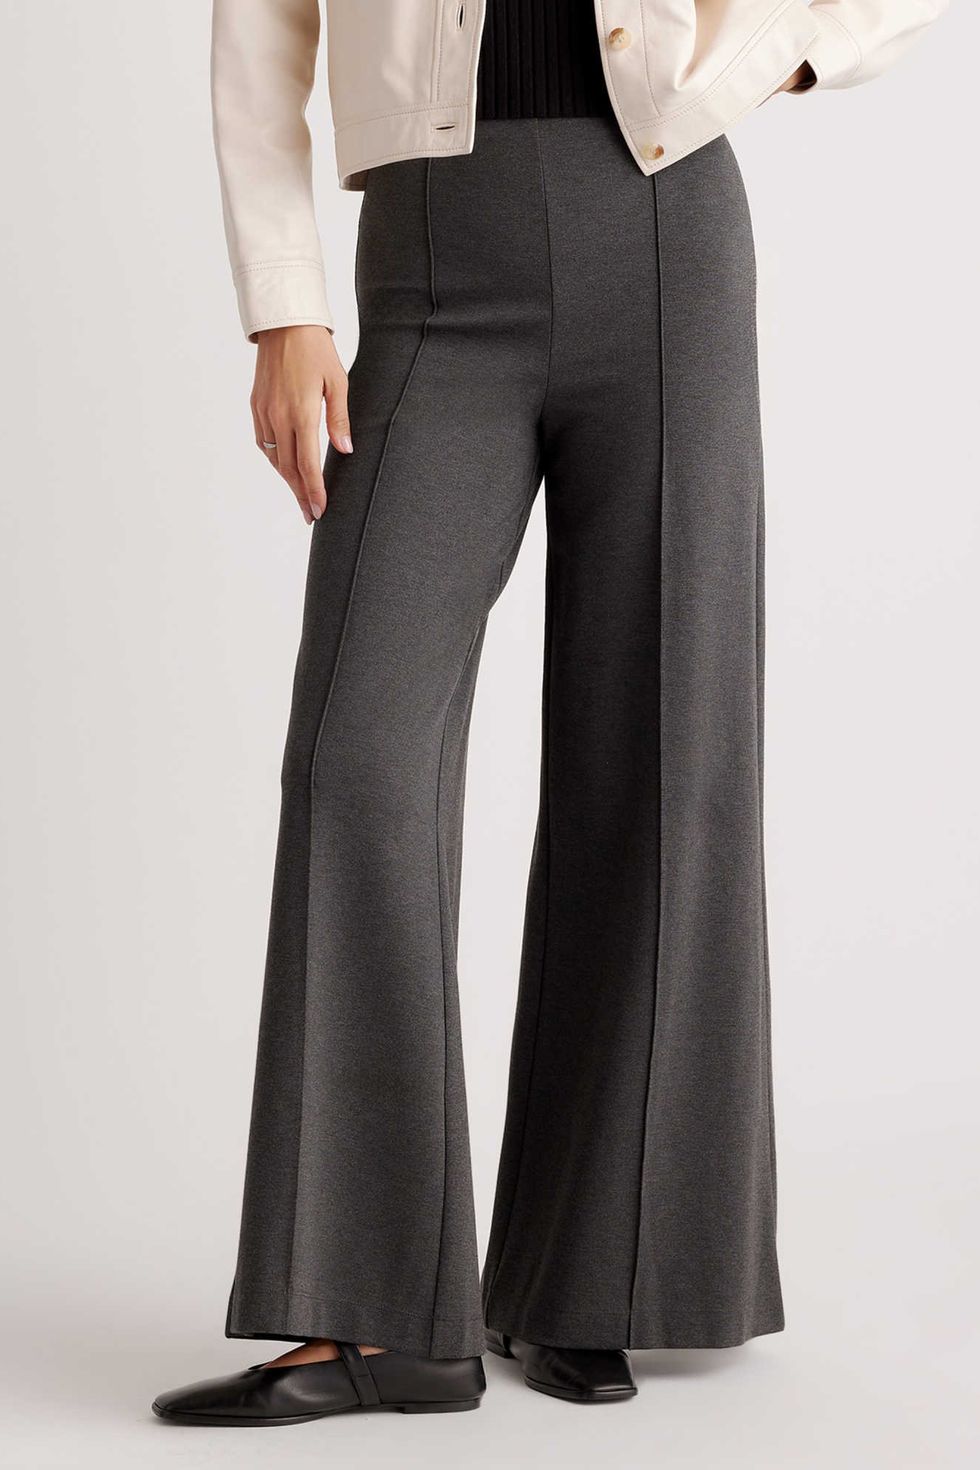 These Spanx Cropped Twill Pants Are 30% Off Right Now